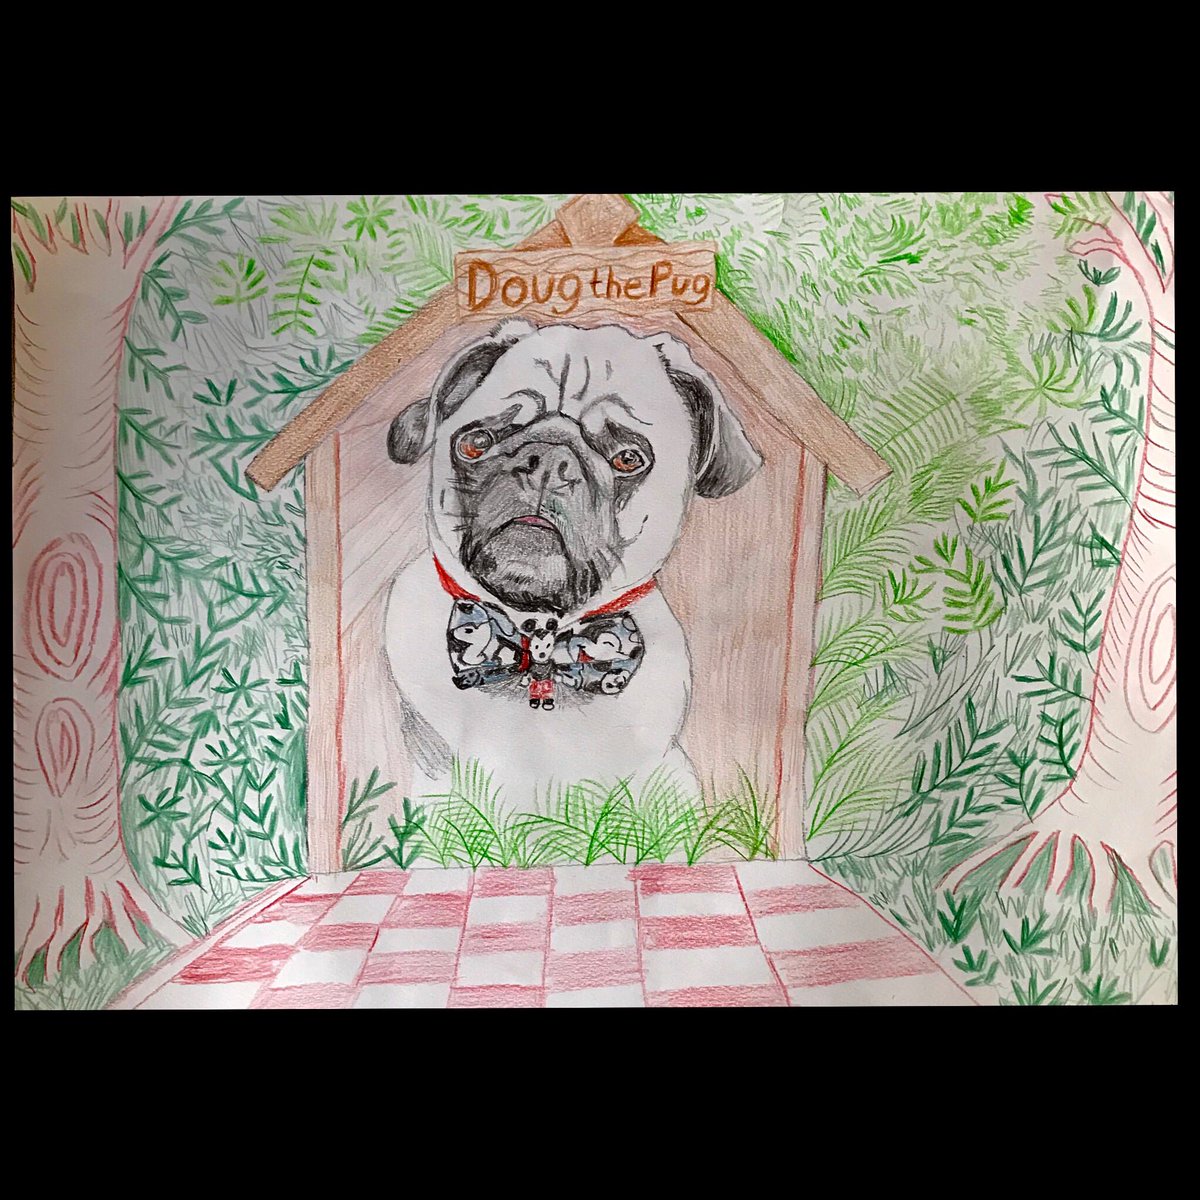 This truly fabulous portrait of Doug was completed as part of an art therapy class at @MosaicClubhouse where we support friends with mental health challenges. So great! @PetsAsTherapyUK @frankysbowtique #arttherapy #mentalhealth #MentalHealthMatters #Therapydog #therapypug